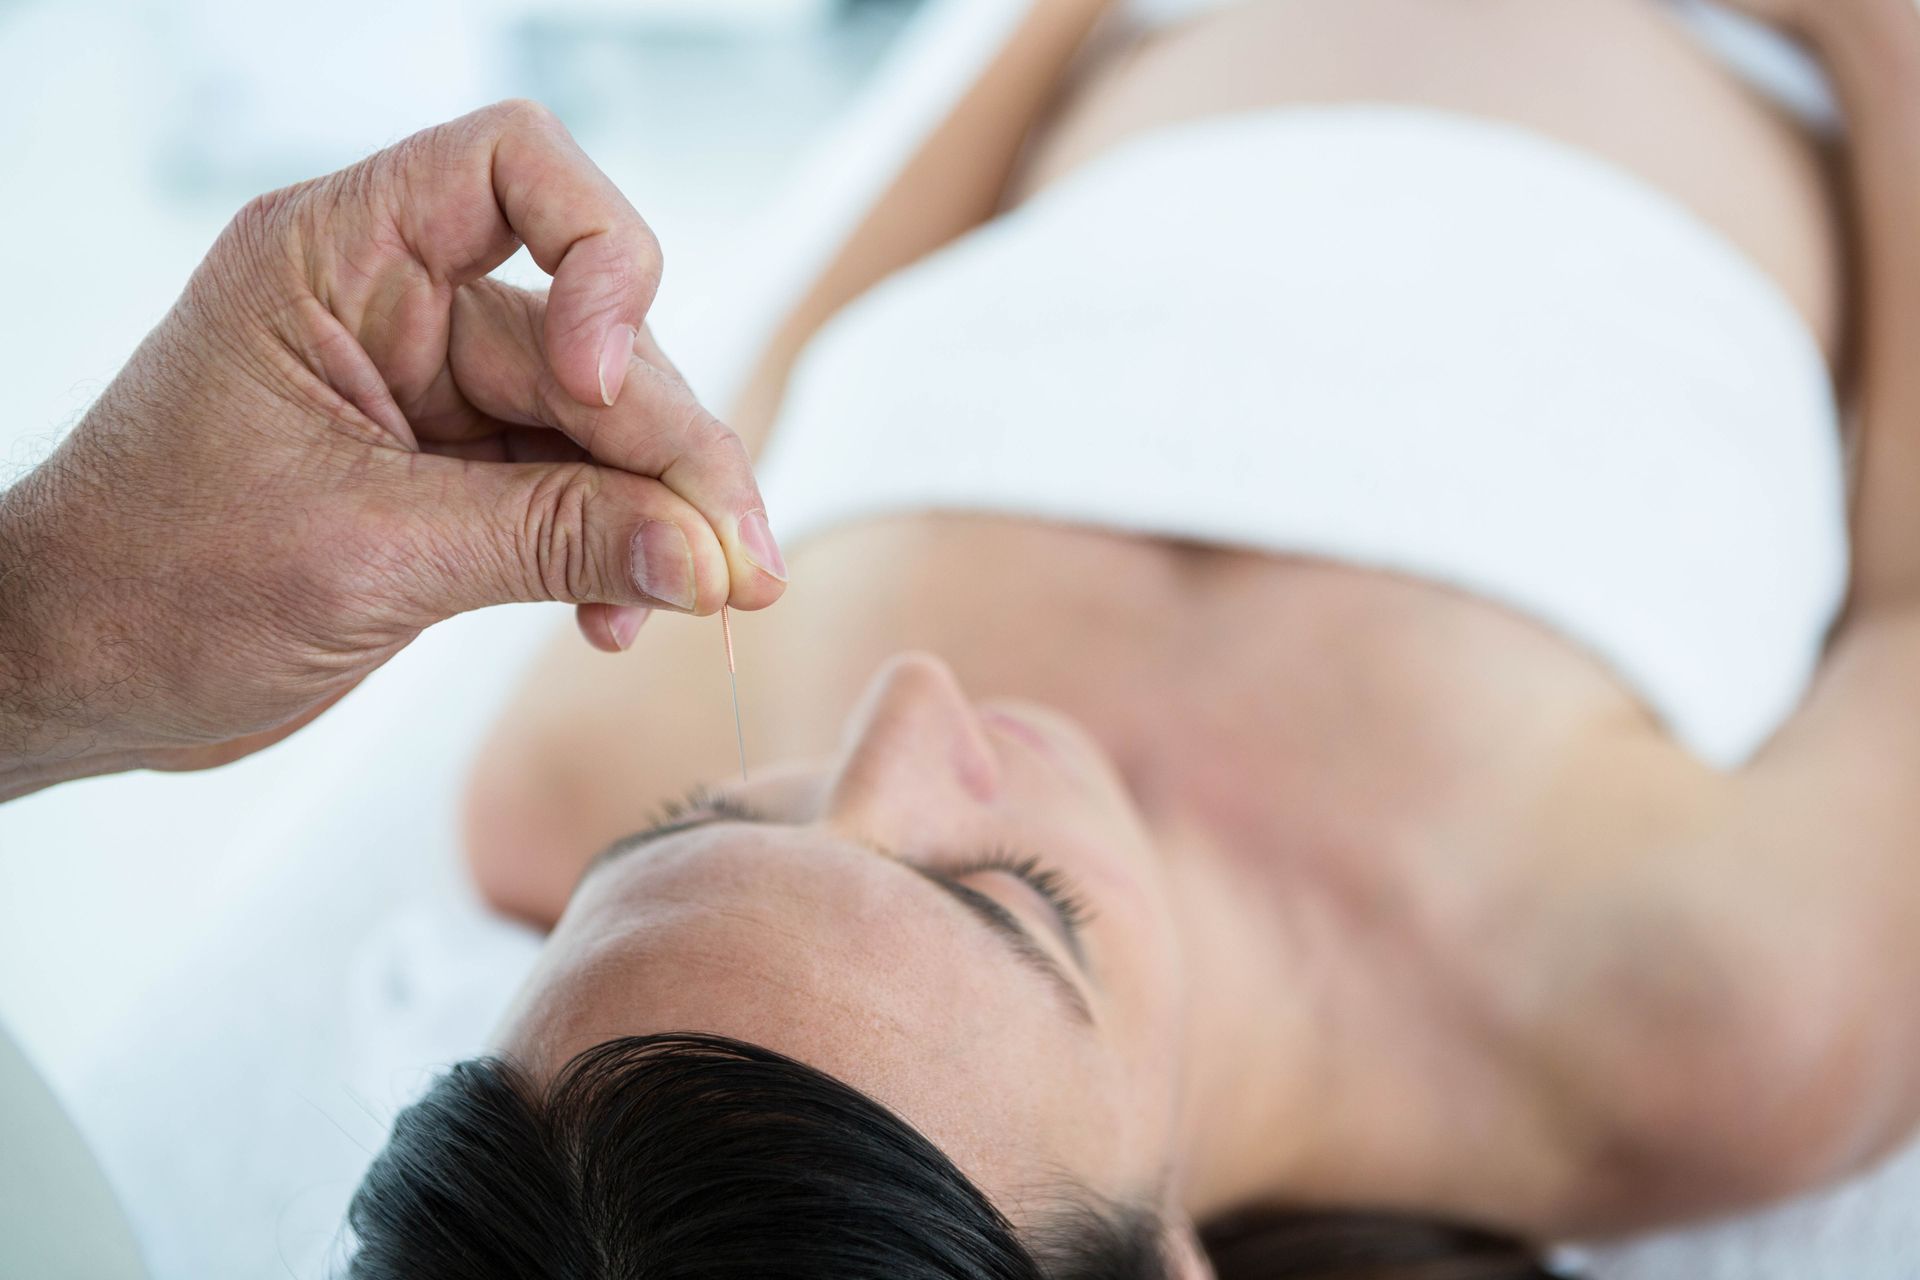 A pregnant woman is getting an acupuncture treatment at a spa.